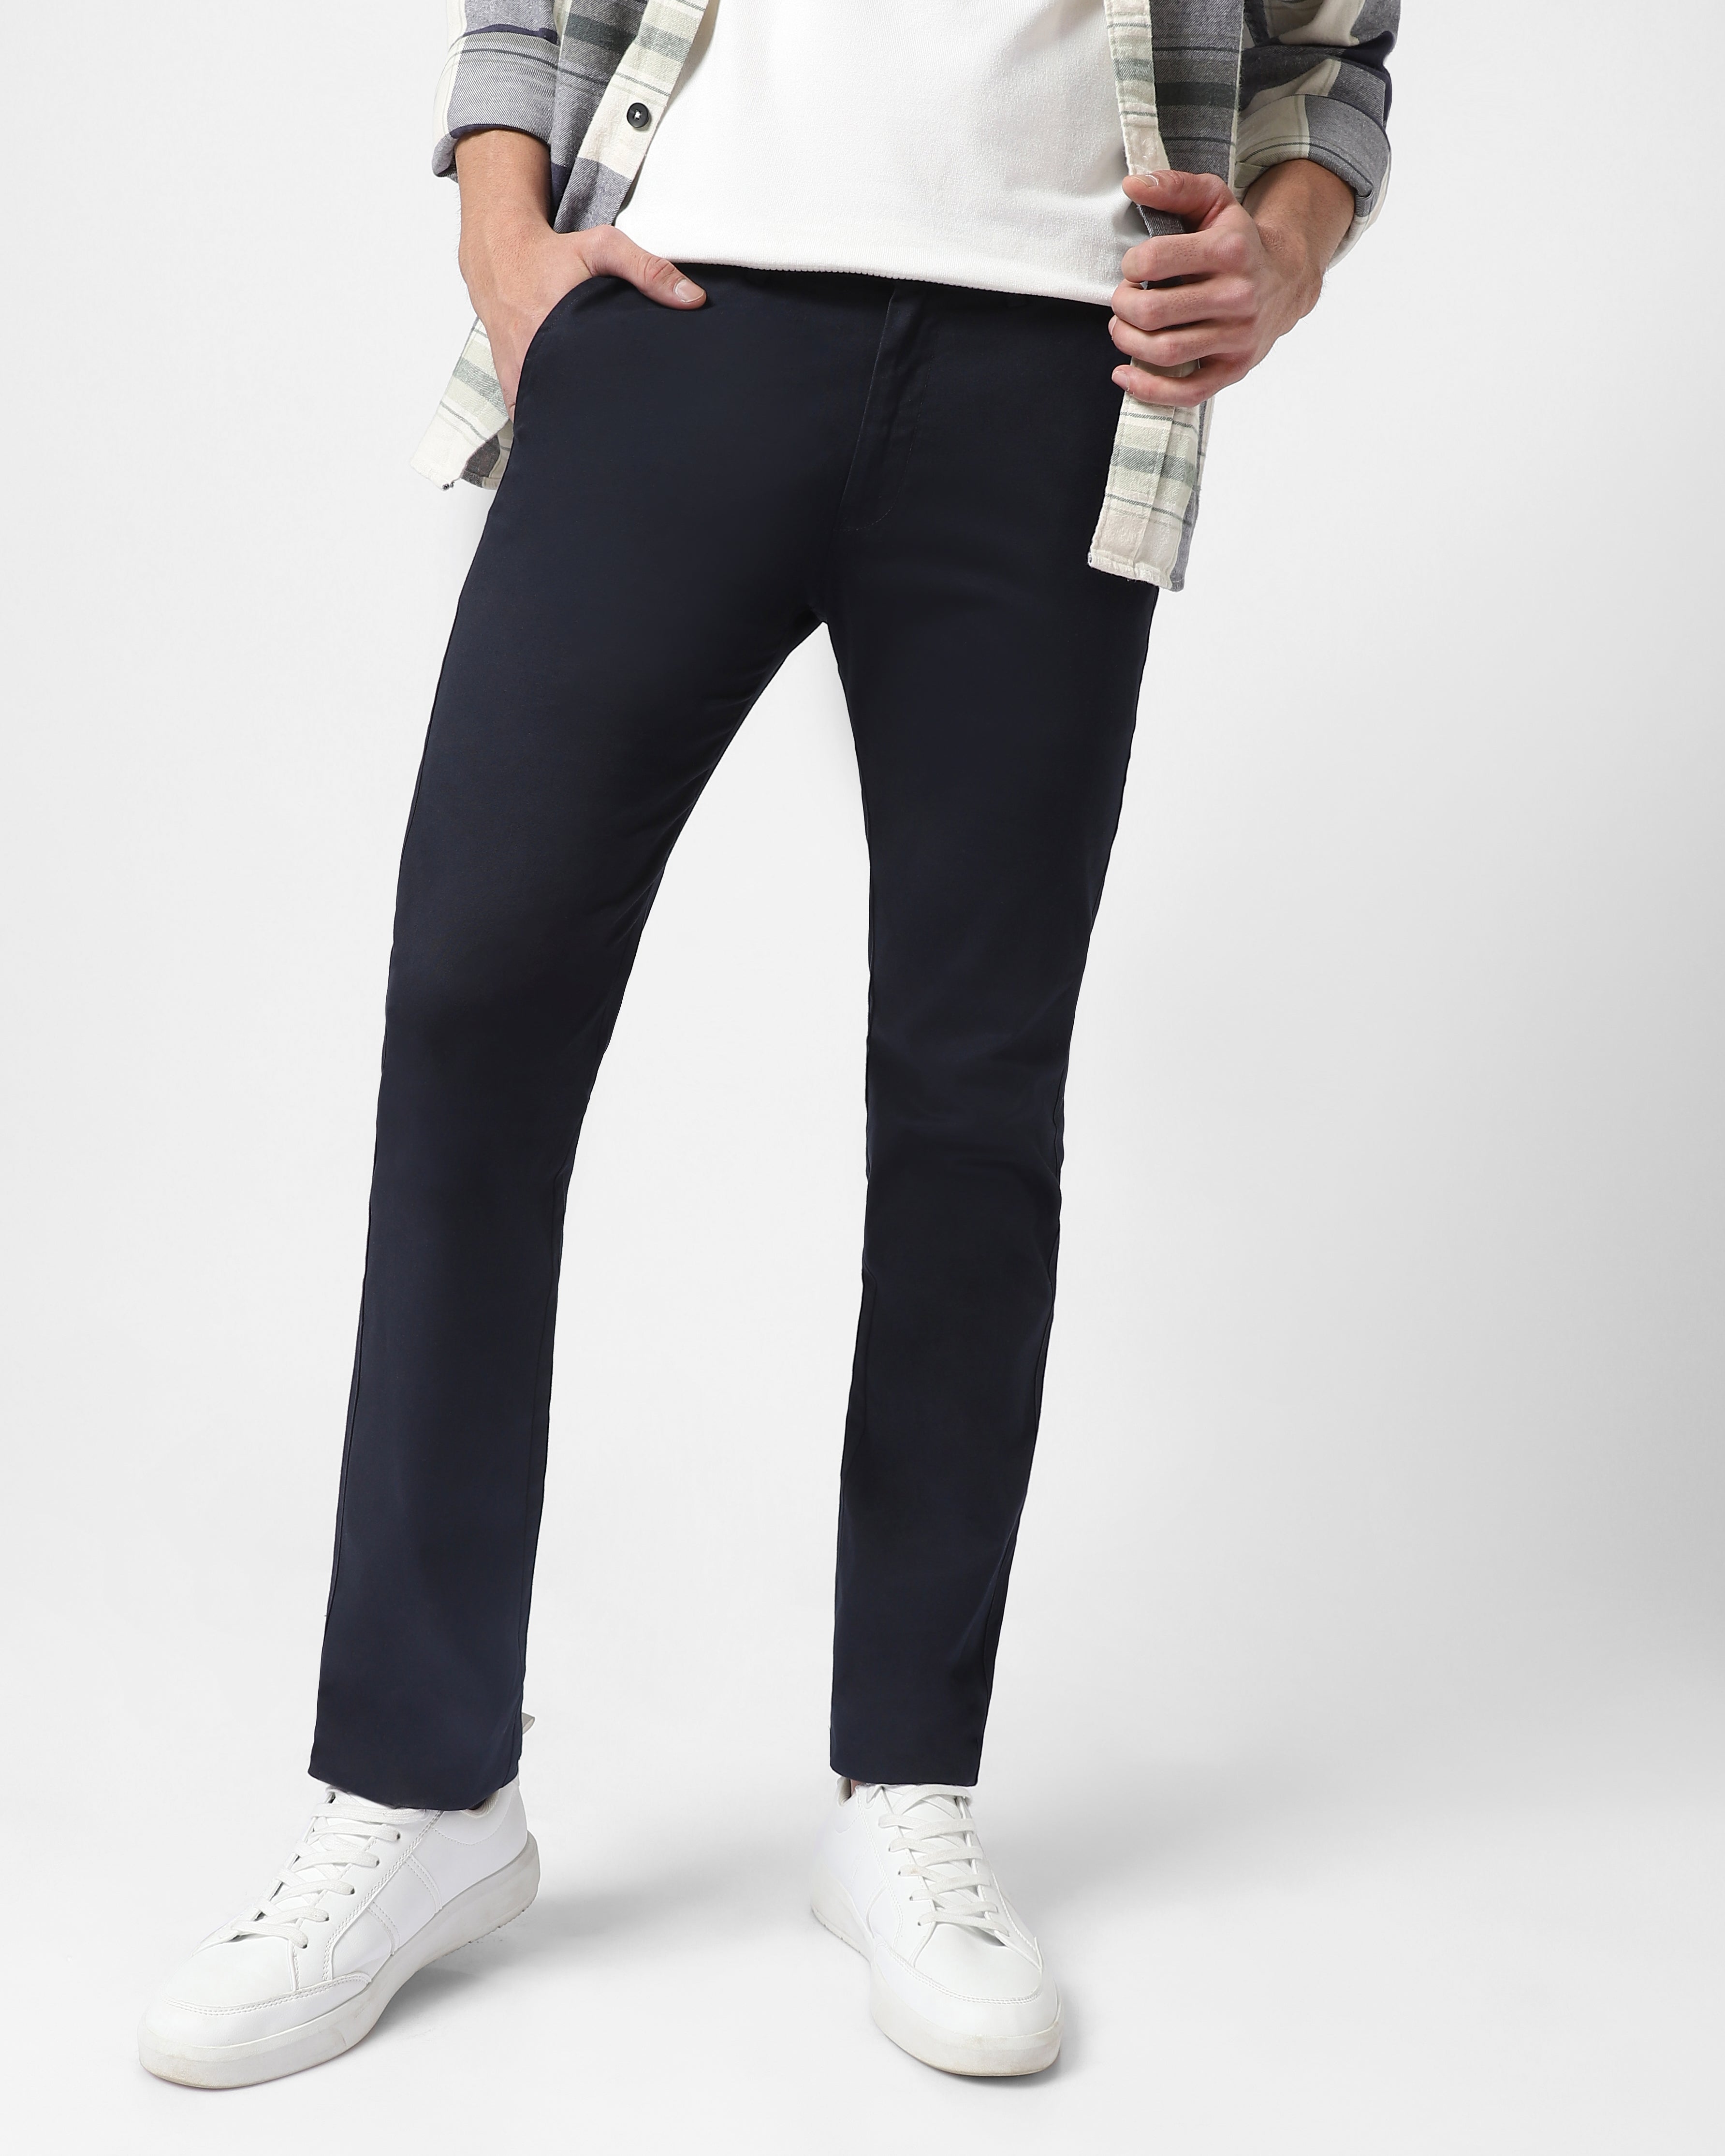 Men's Navy Blue Cotton Slim Fit Casual Chinos Trousers Stretch